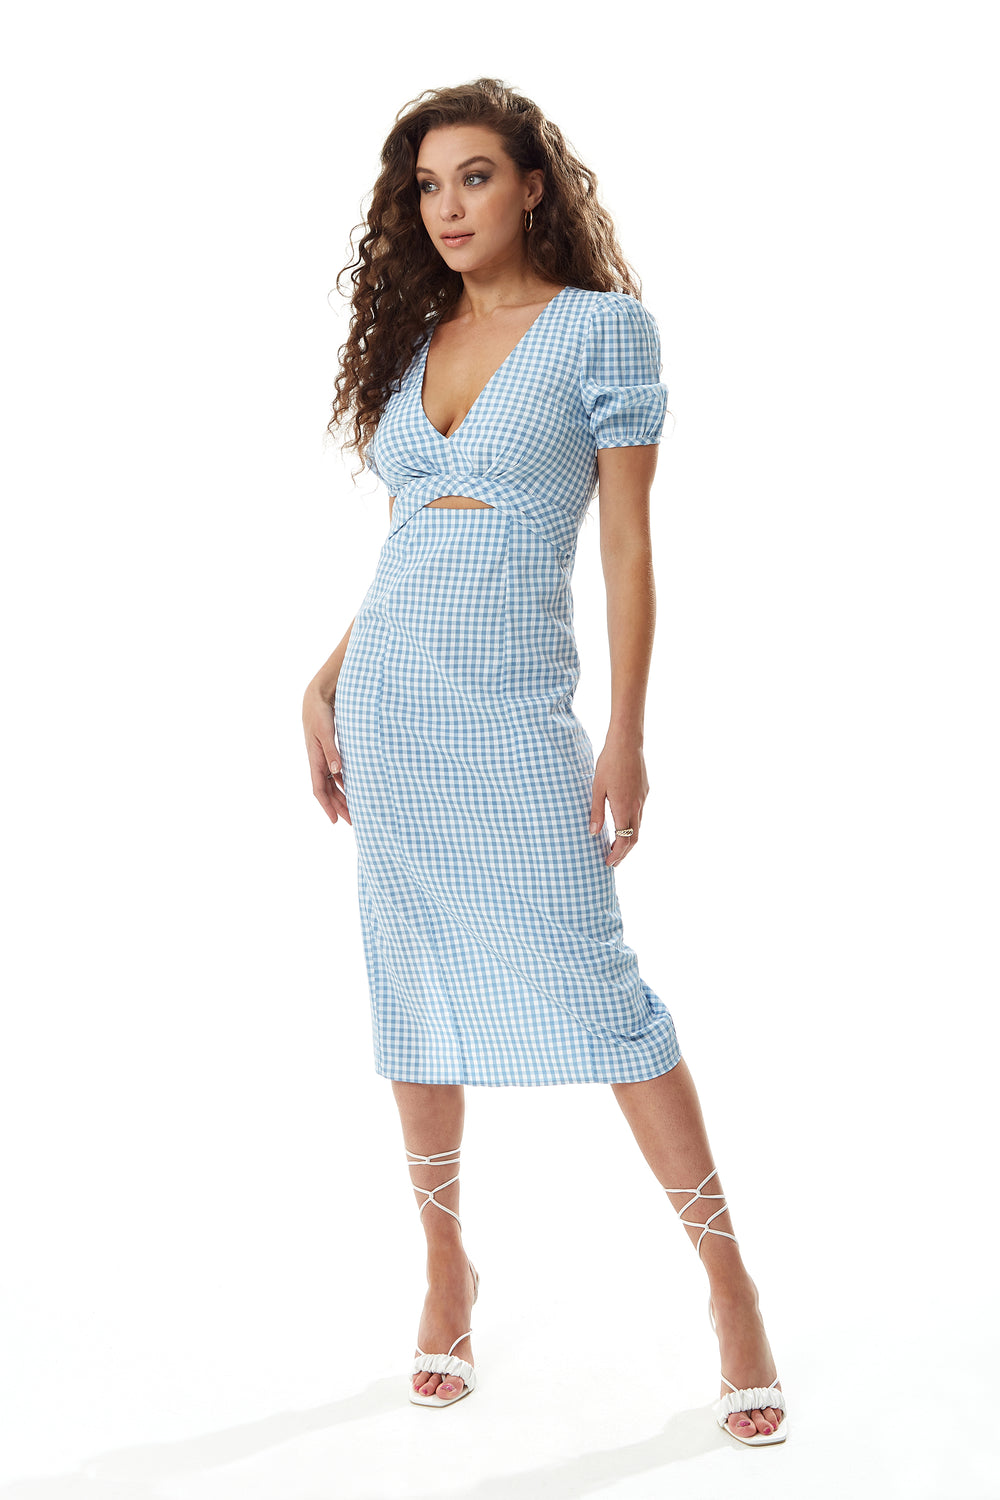 Liquorish Gingham Cut out front Midi Dress in Blue and White